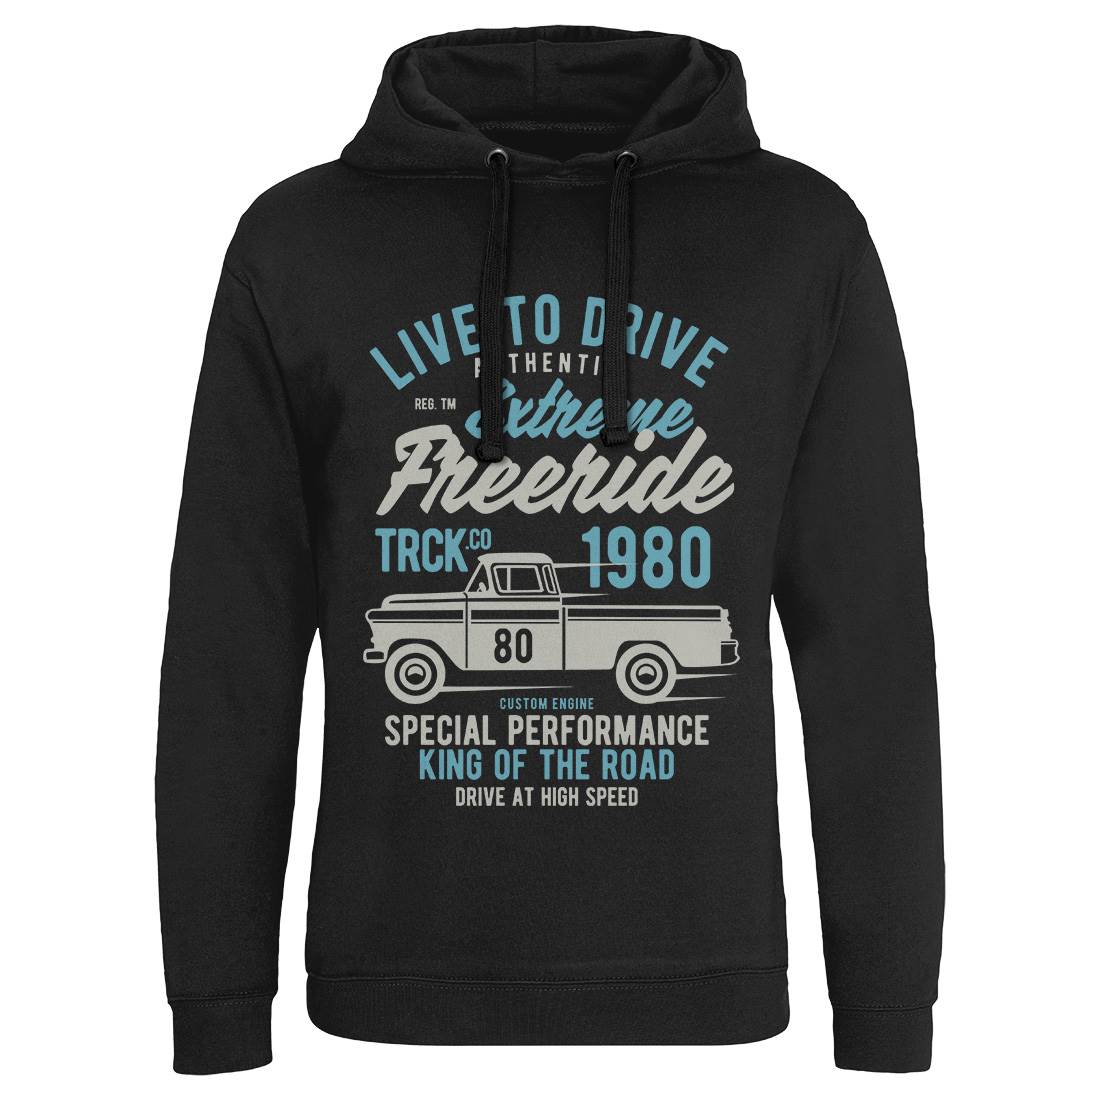 Extreme Freeride Truck Mens Hoodie Without Pocket Cars B401